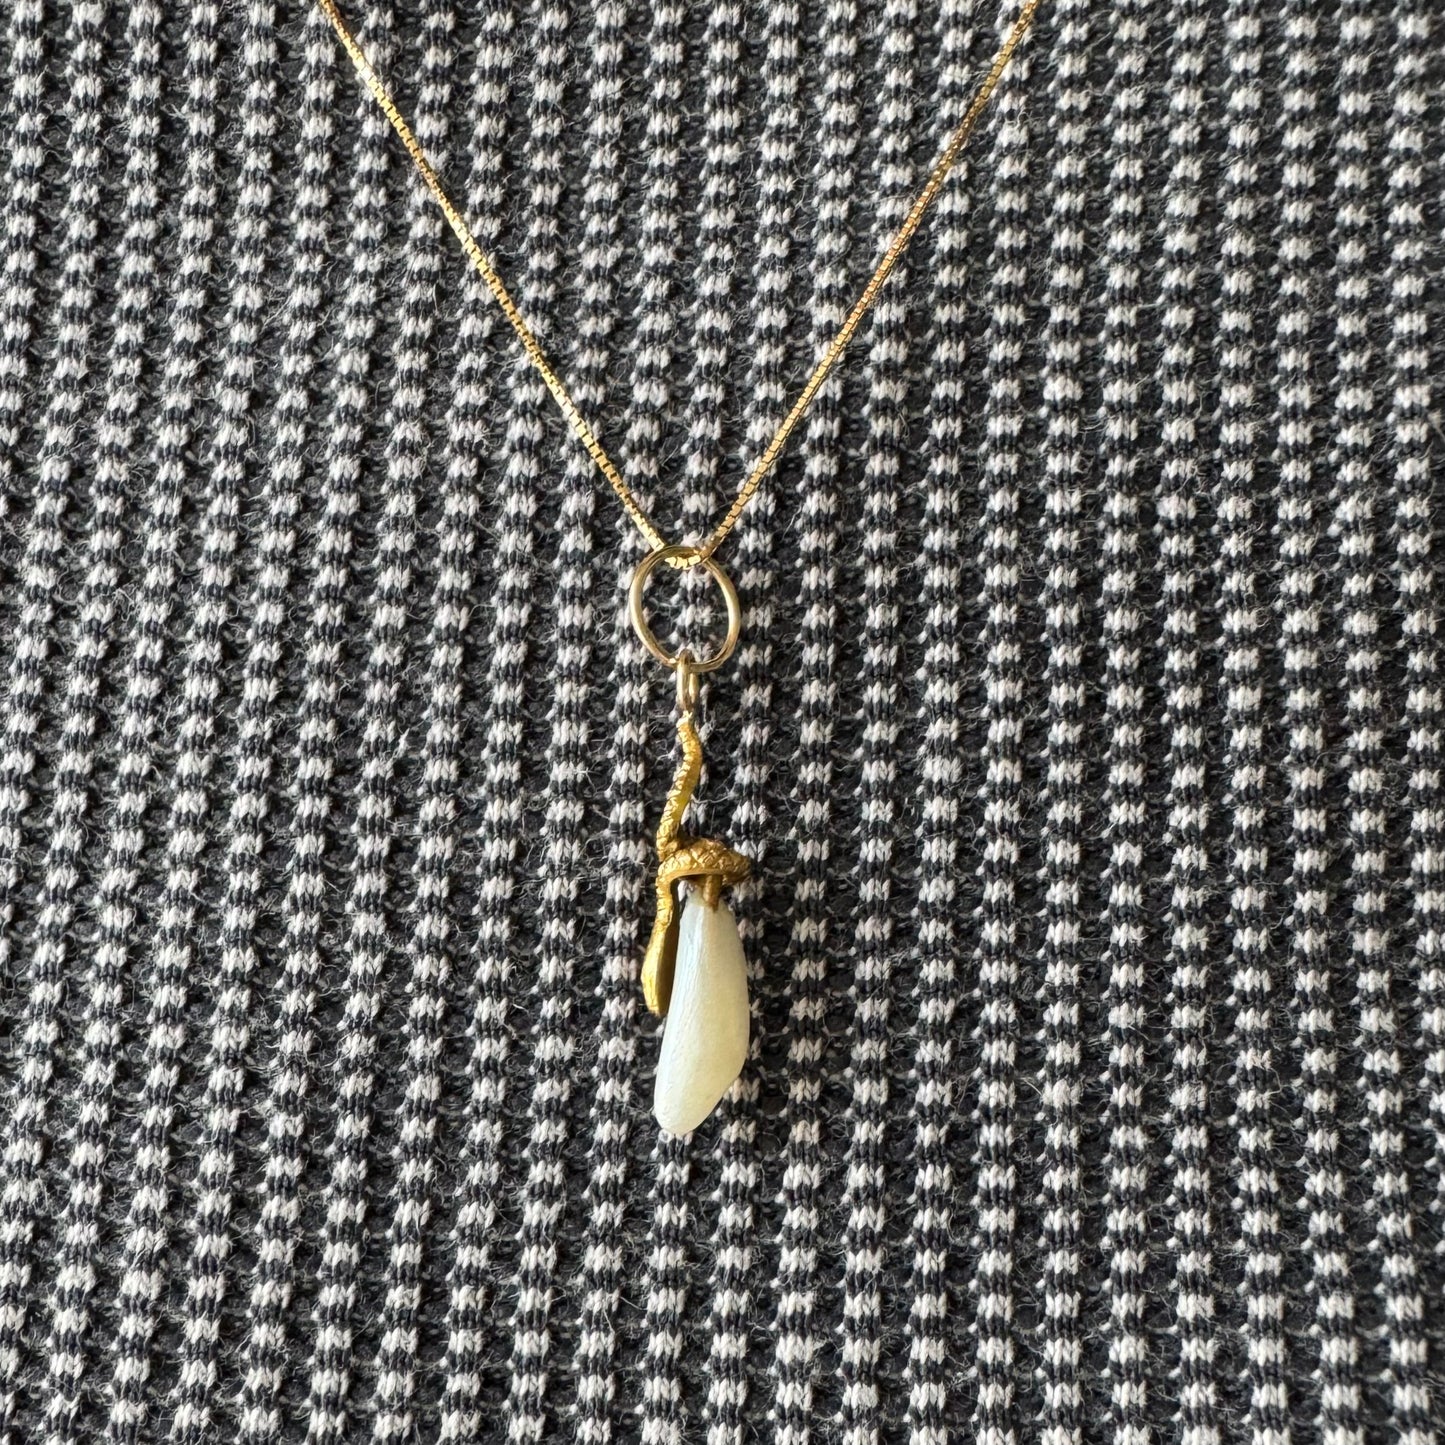 reimagined A N T I Q U E // a snake and her egg / 14k yellow gold and freshwater pearl / a conversion pendant